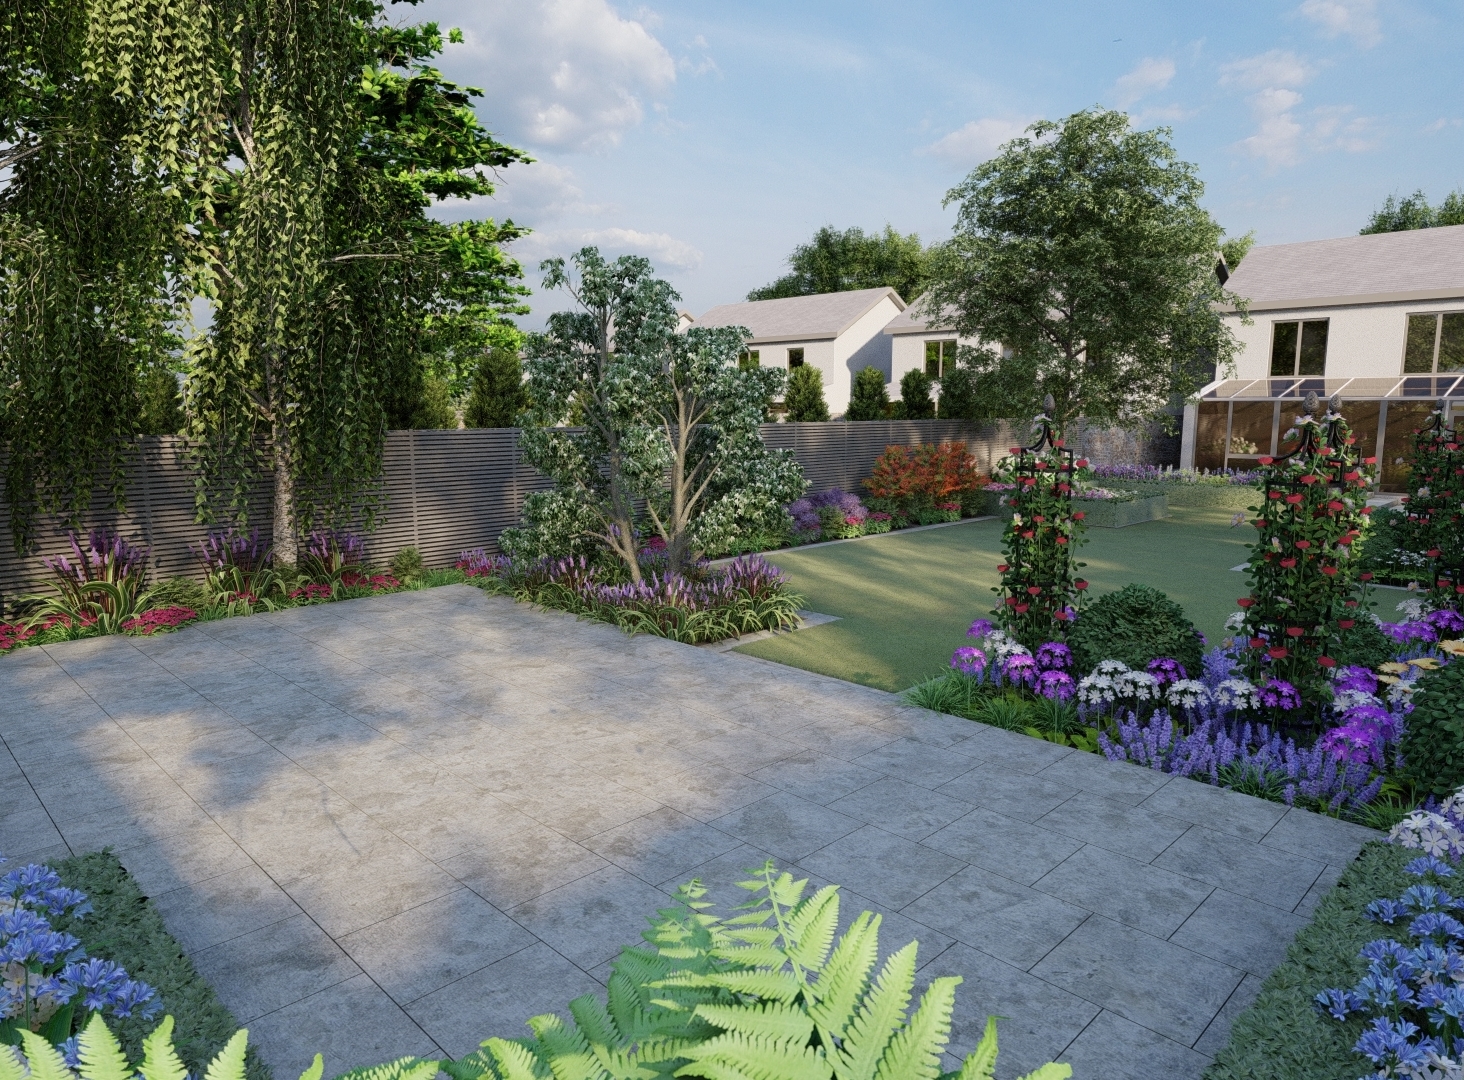 Garden Design Visual for a large Family Gardenin Rathfarnham with raised patio, bespoke fencing and extensive mixed planting borders